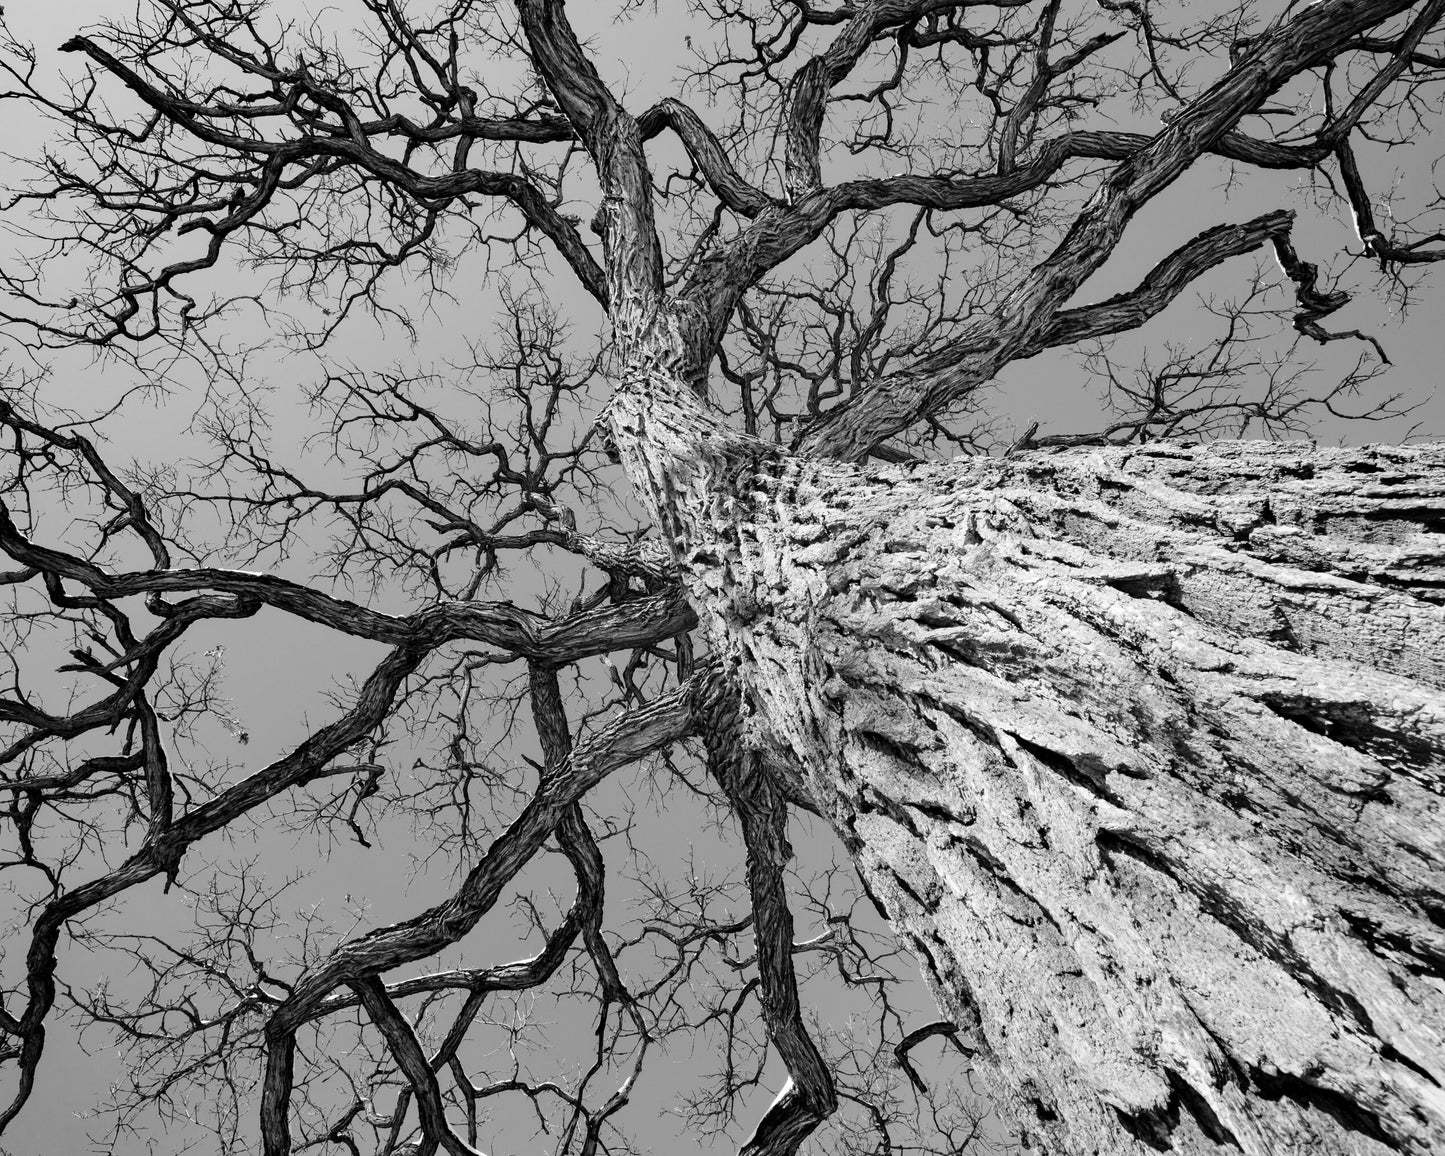 Oak Tree Canopy, black and white art photography, large photo print decor, paper, canvas, winter picture 8x10 20x20 20x30 24x36 30x45 40x60